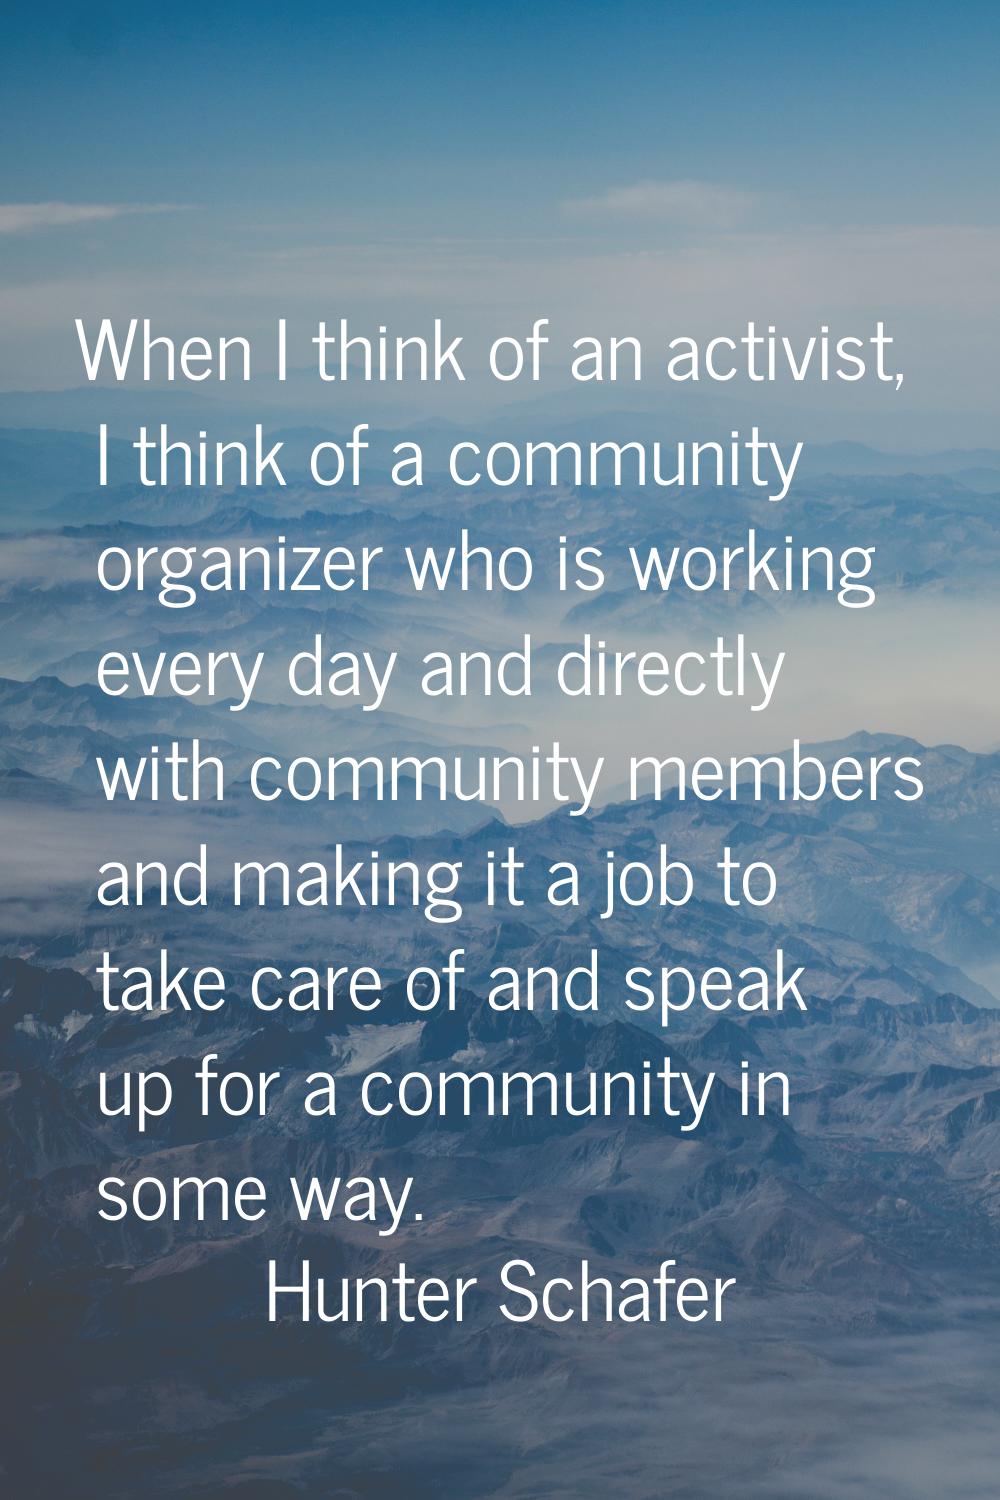 When I think of an activist, I think of a community organizer who is working every day and directly